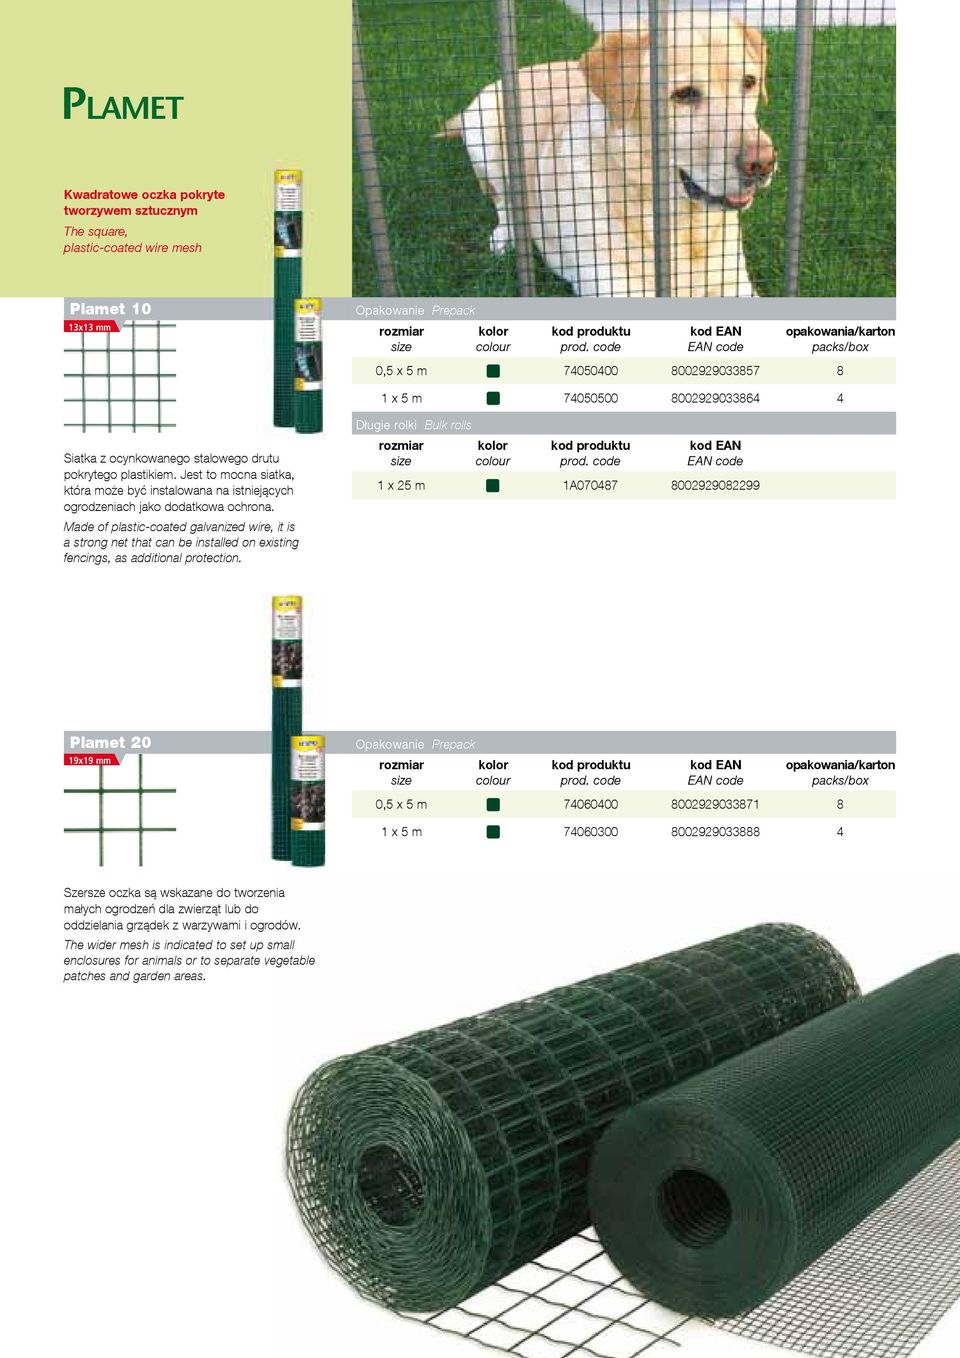 Made of plastic-coated galvanized wire, it is a strong net that can be installed on existing fencings, as additional protection.